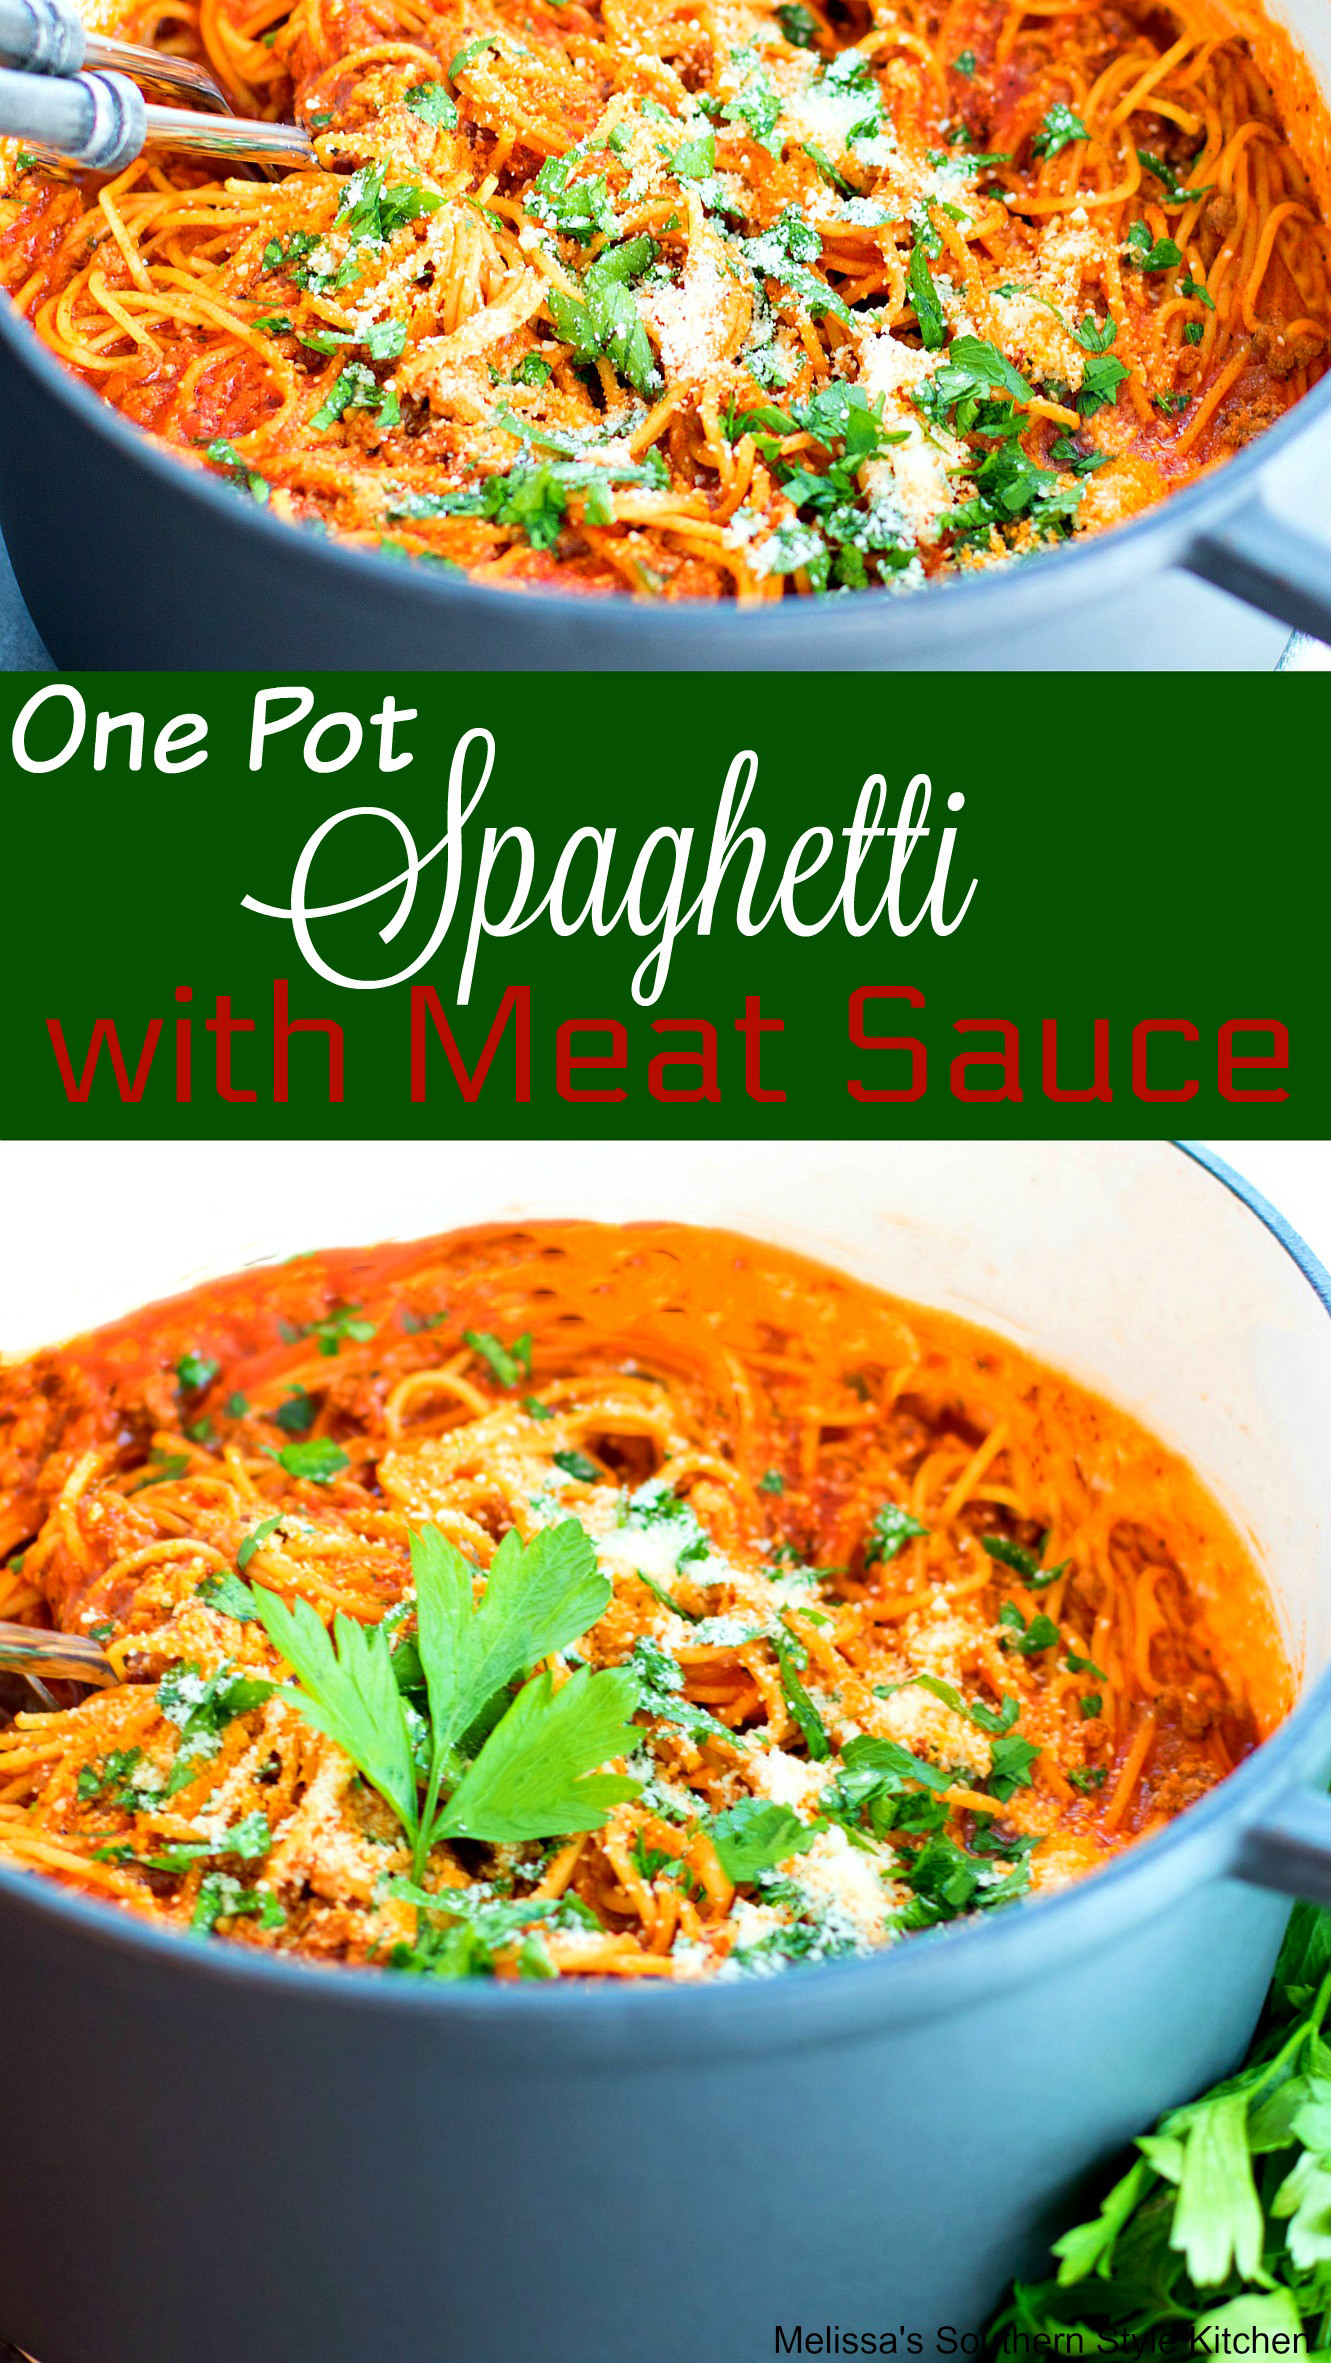 One Pot Spaghetti With Meat Sauce
 e Pot Spaghetti with Meat Sauce